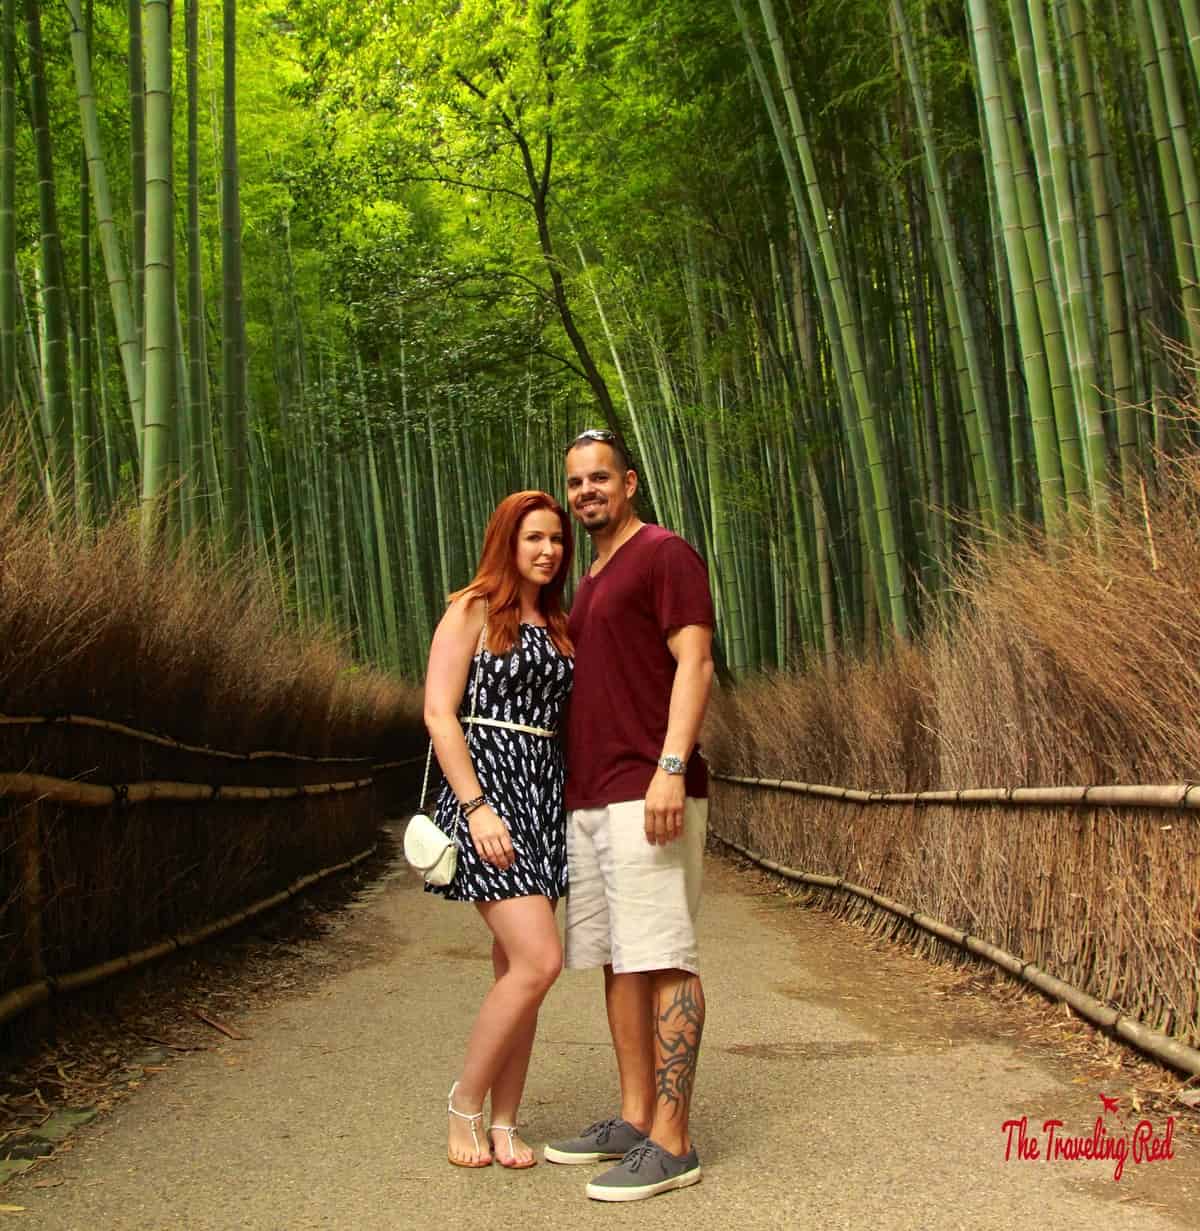 You must see Arashiyama Bamboo Grove when you visit Japan. Make sure to go early to avoid the crowds. The bamboo forest was incredible. They say that those trees can grow up to 3 feet per day!